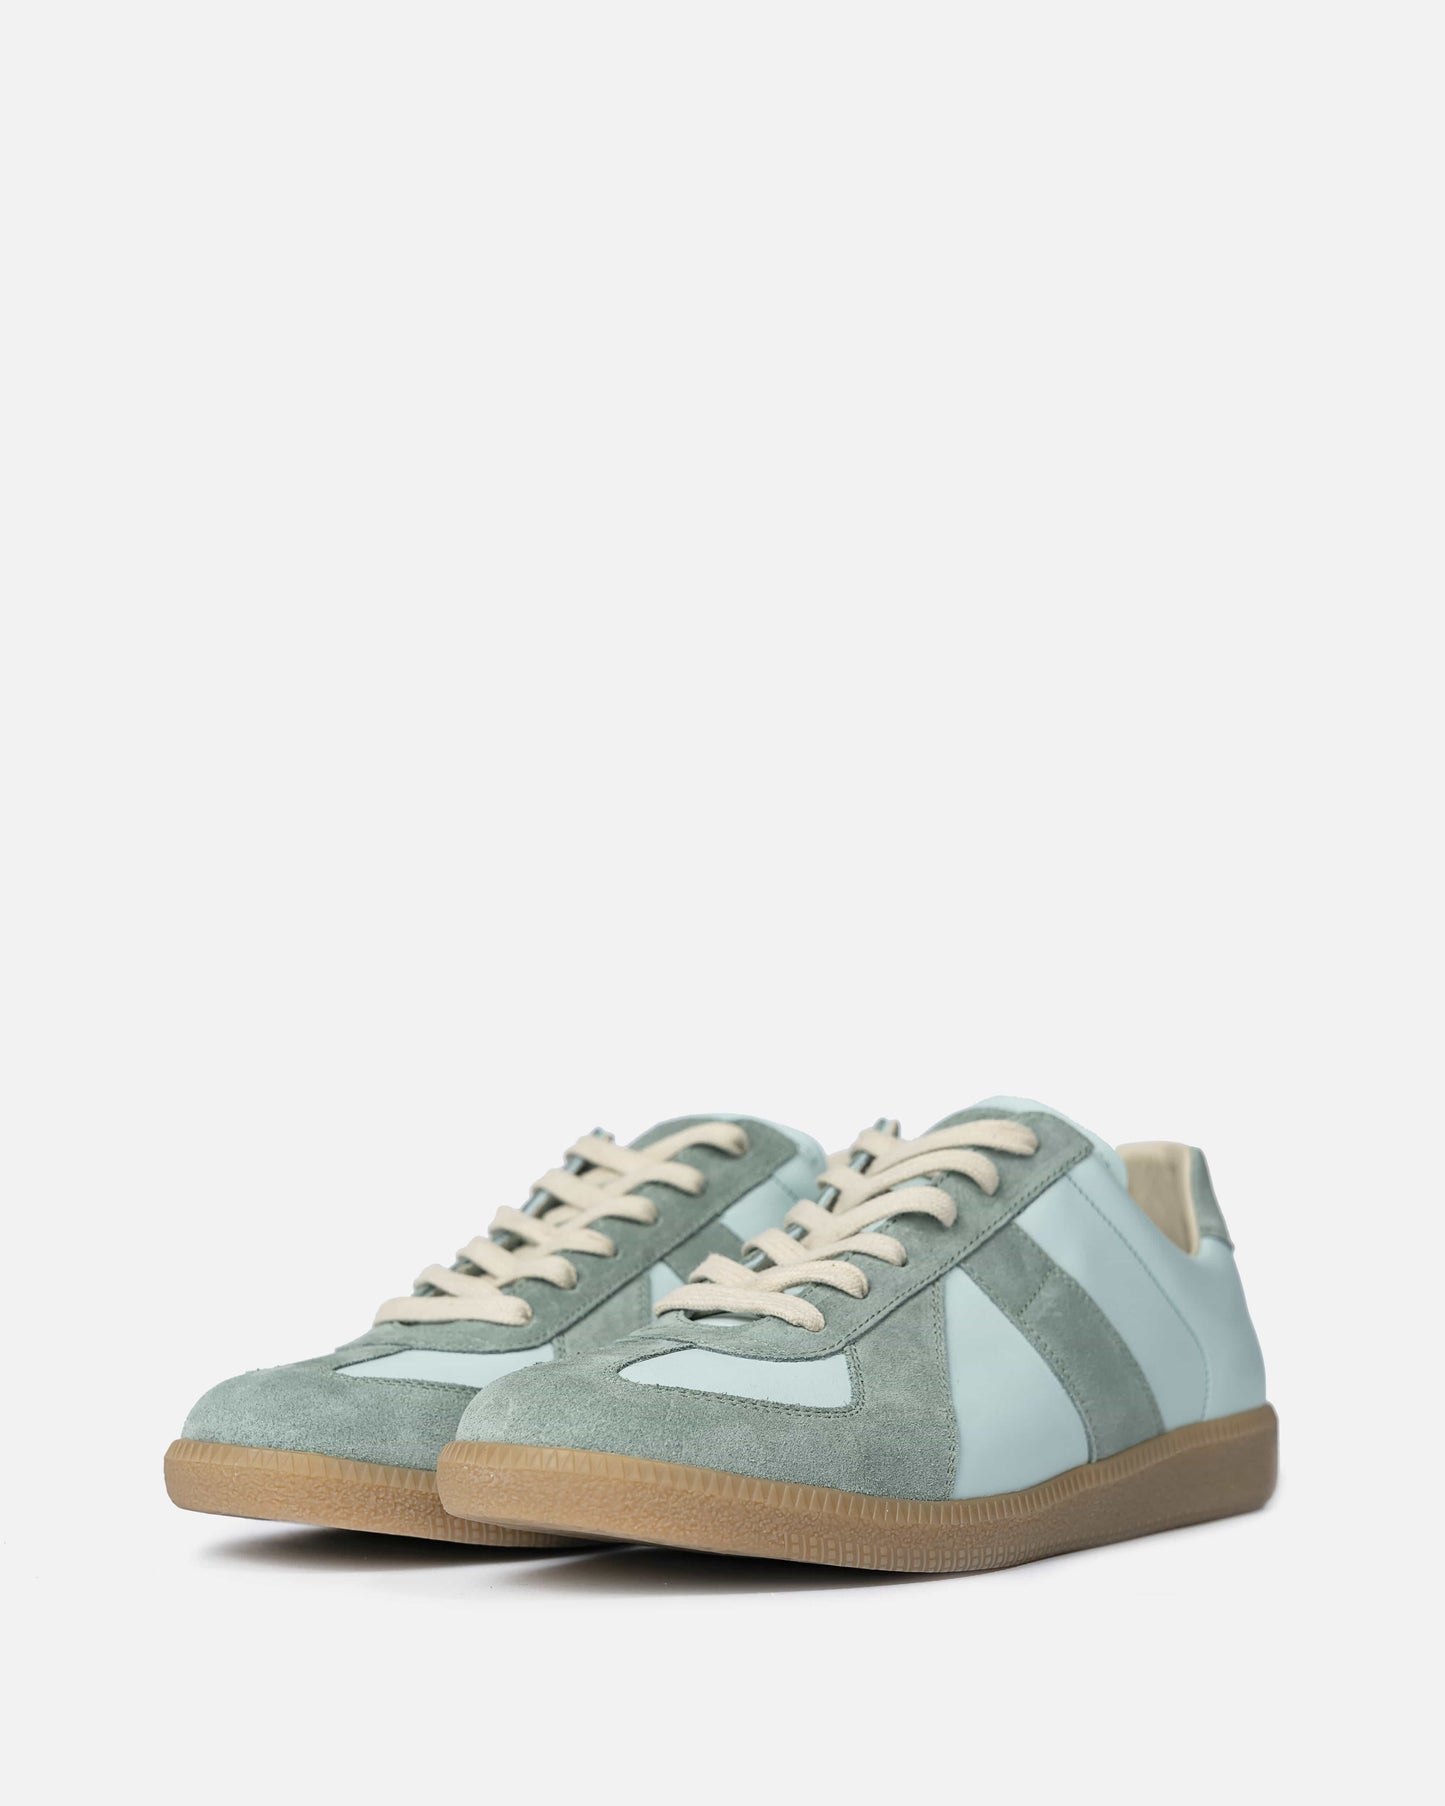 Maison Margiela Men's Shoes Replica Sneakers in Turquoise